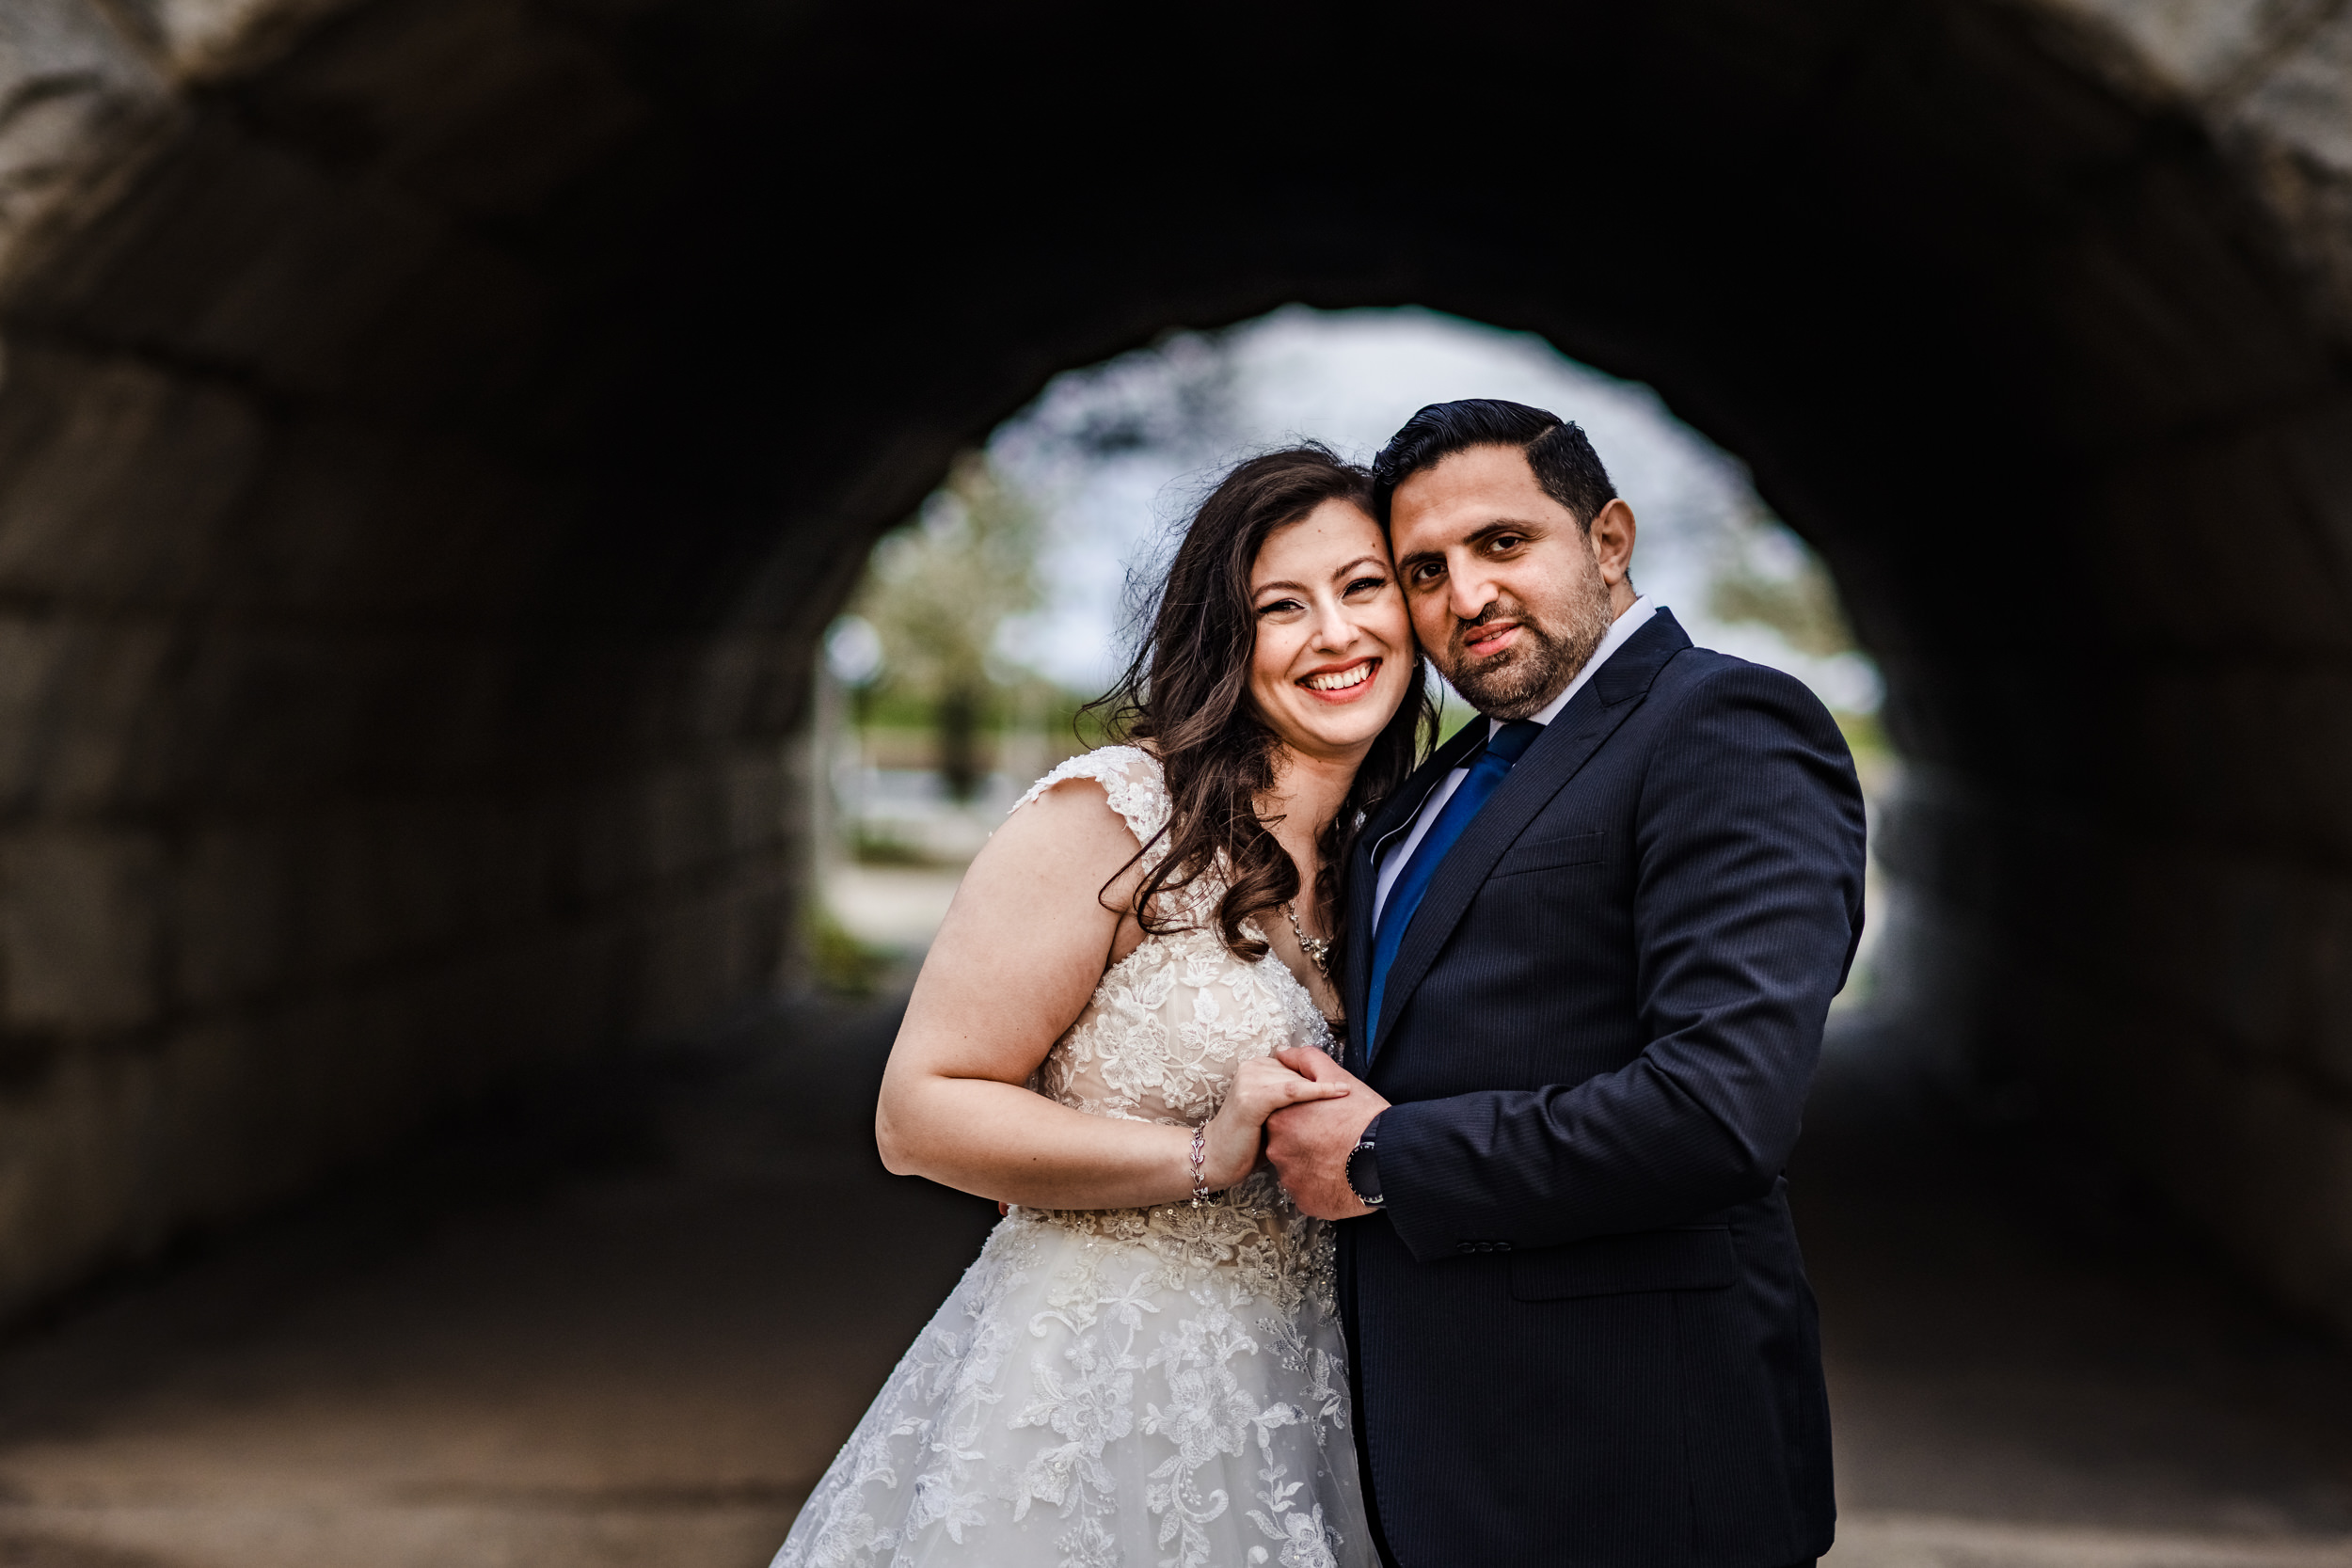 A wedding portrait during an elopement in Lincoln Park in Chicago.